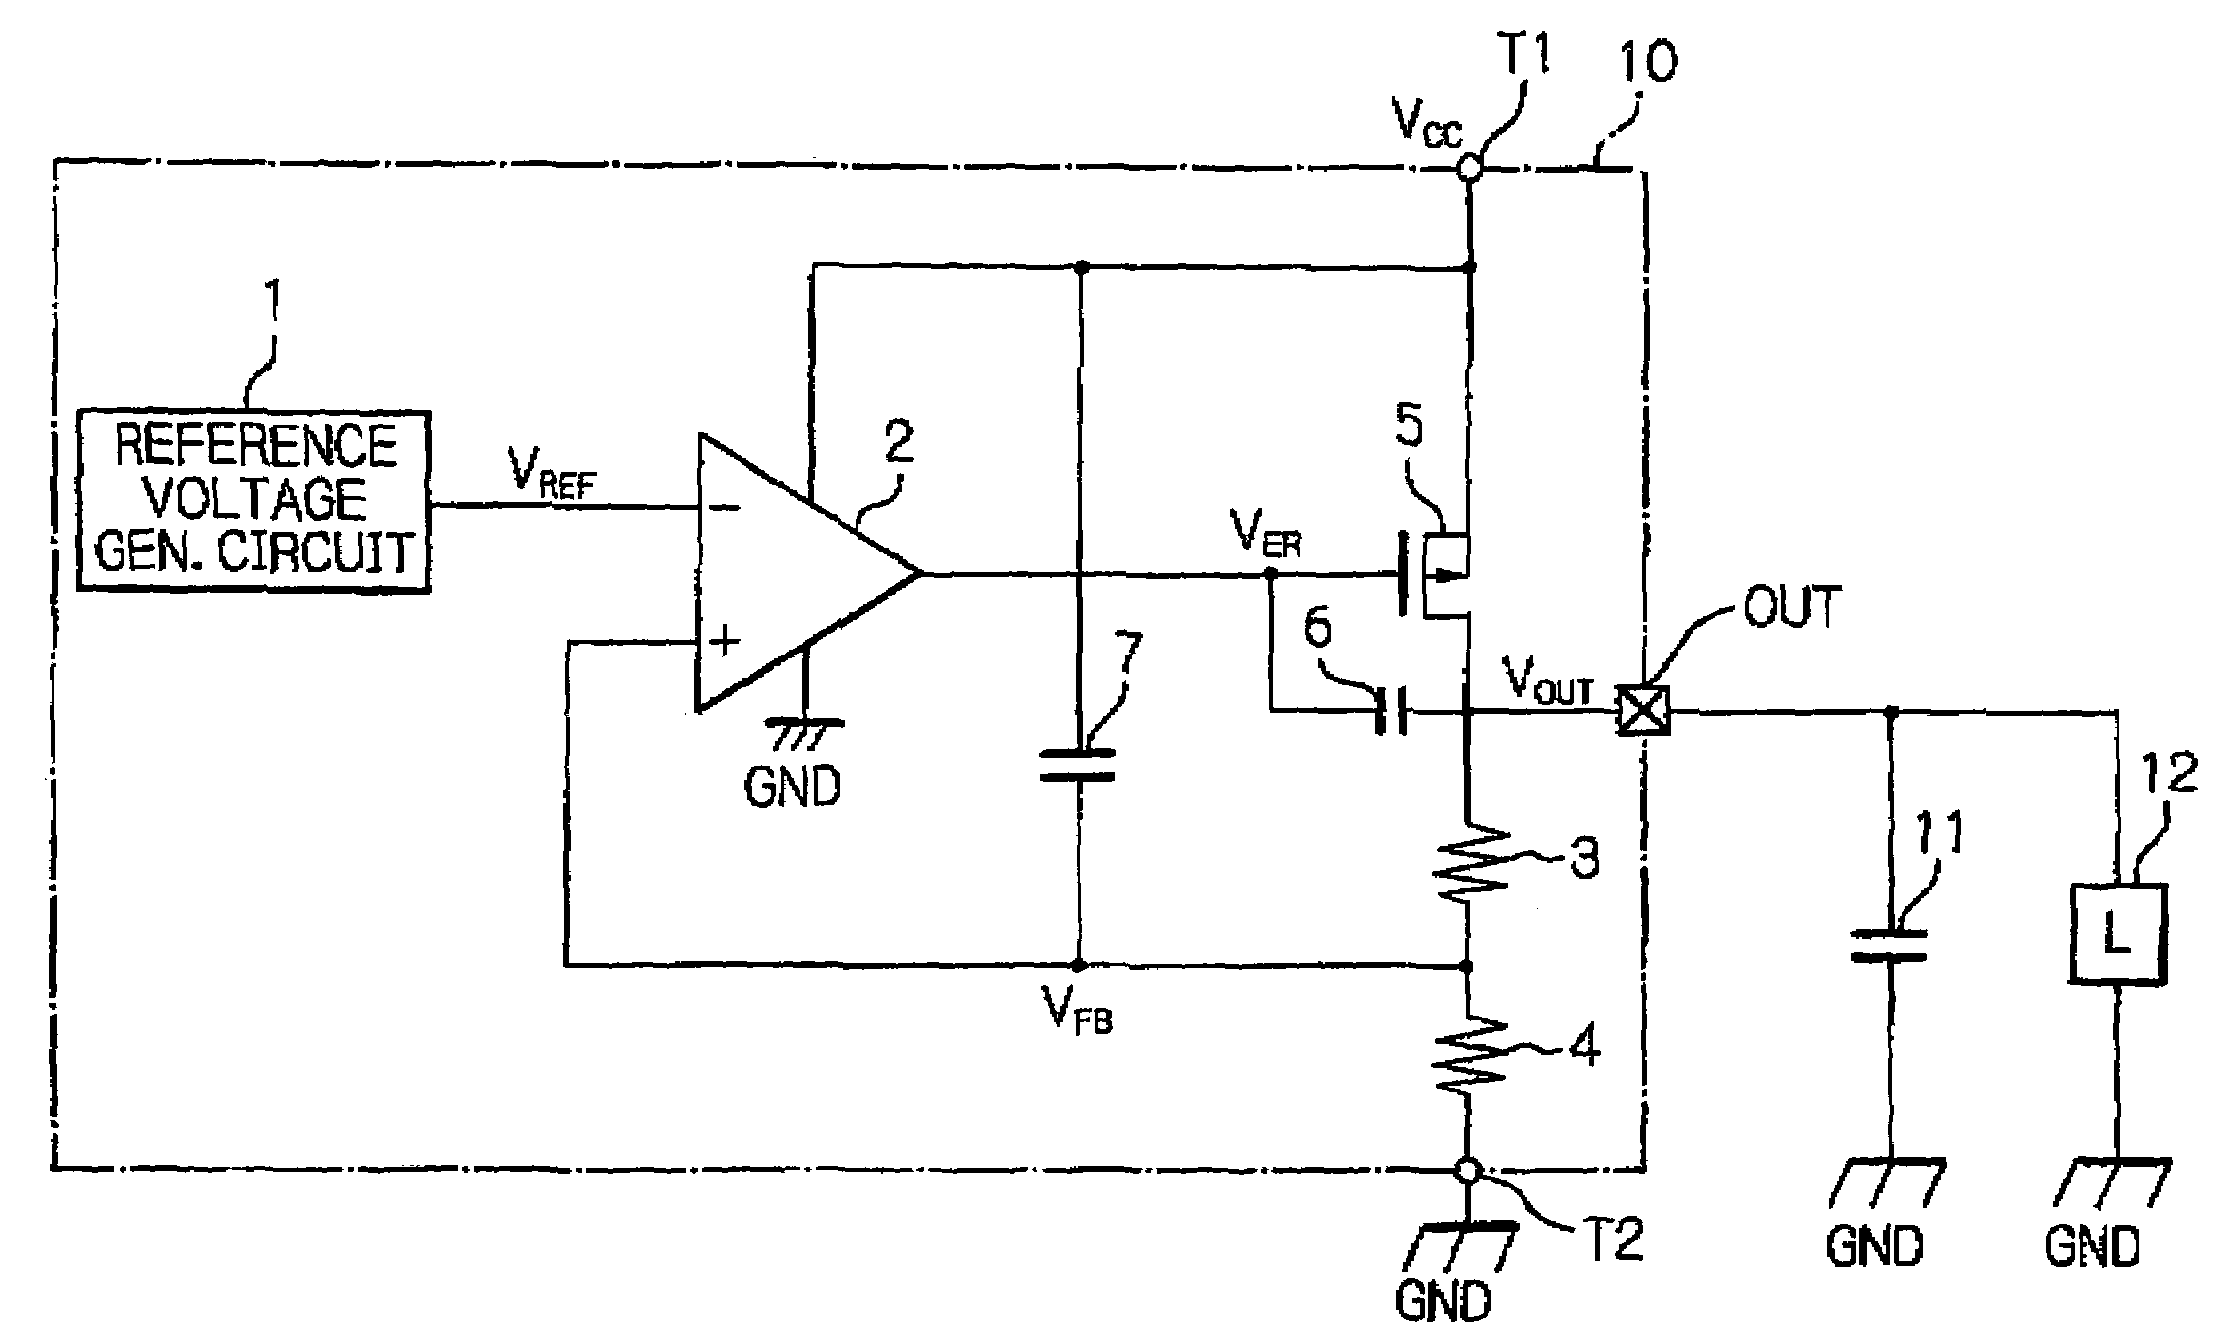 Voltage regulator with improved power supply rejection ratio characteristics and narrow response band